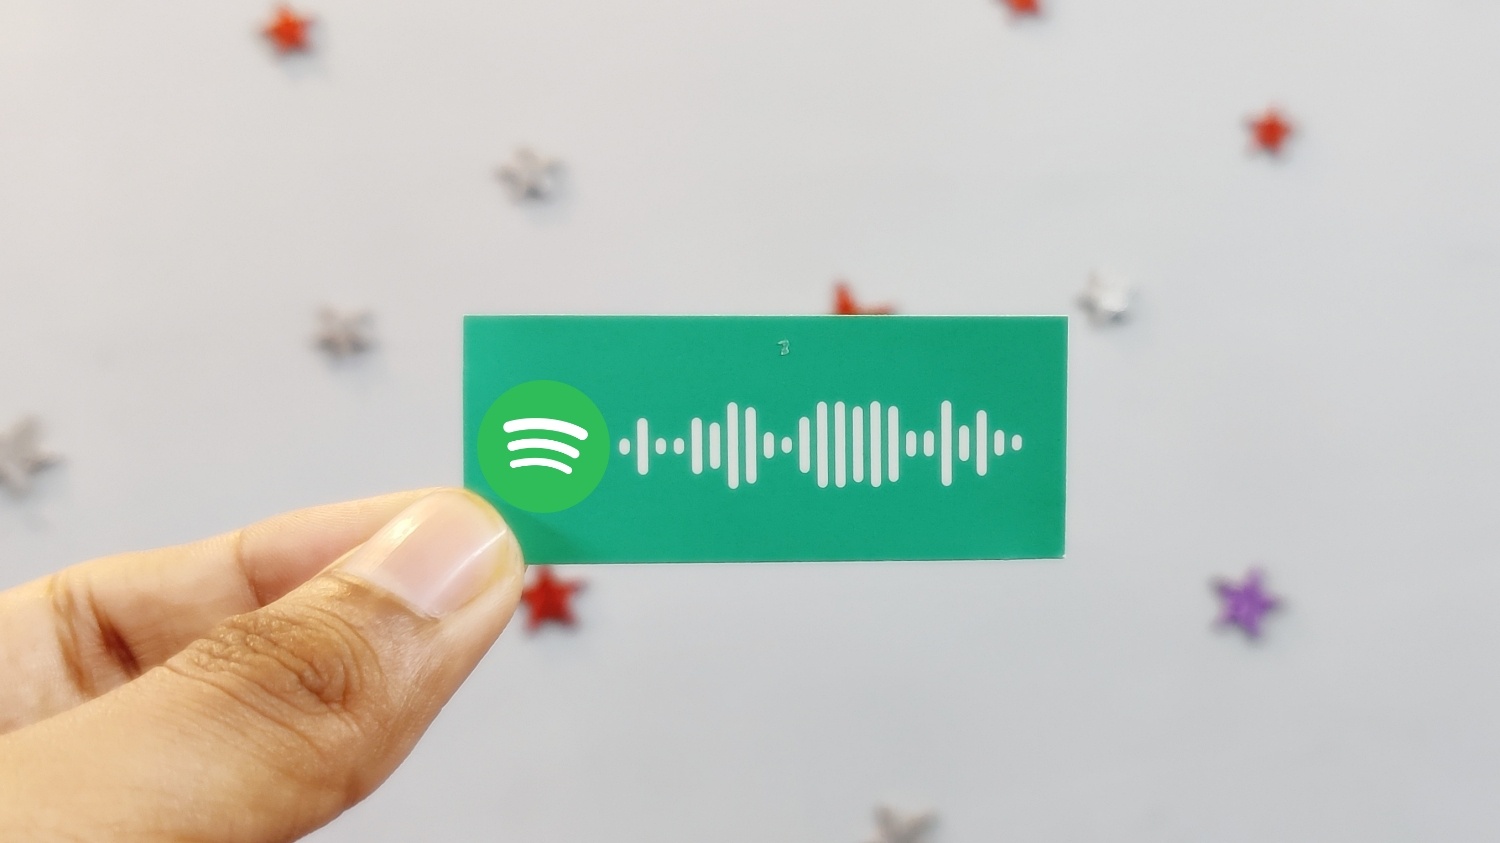 How to Make, Use, and Scan Spotify Codes